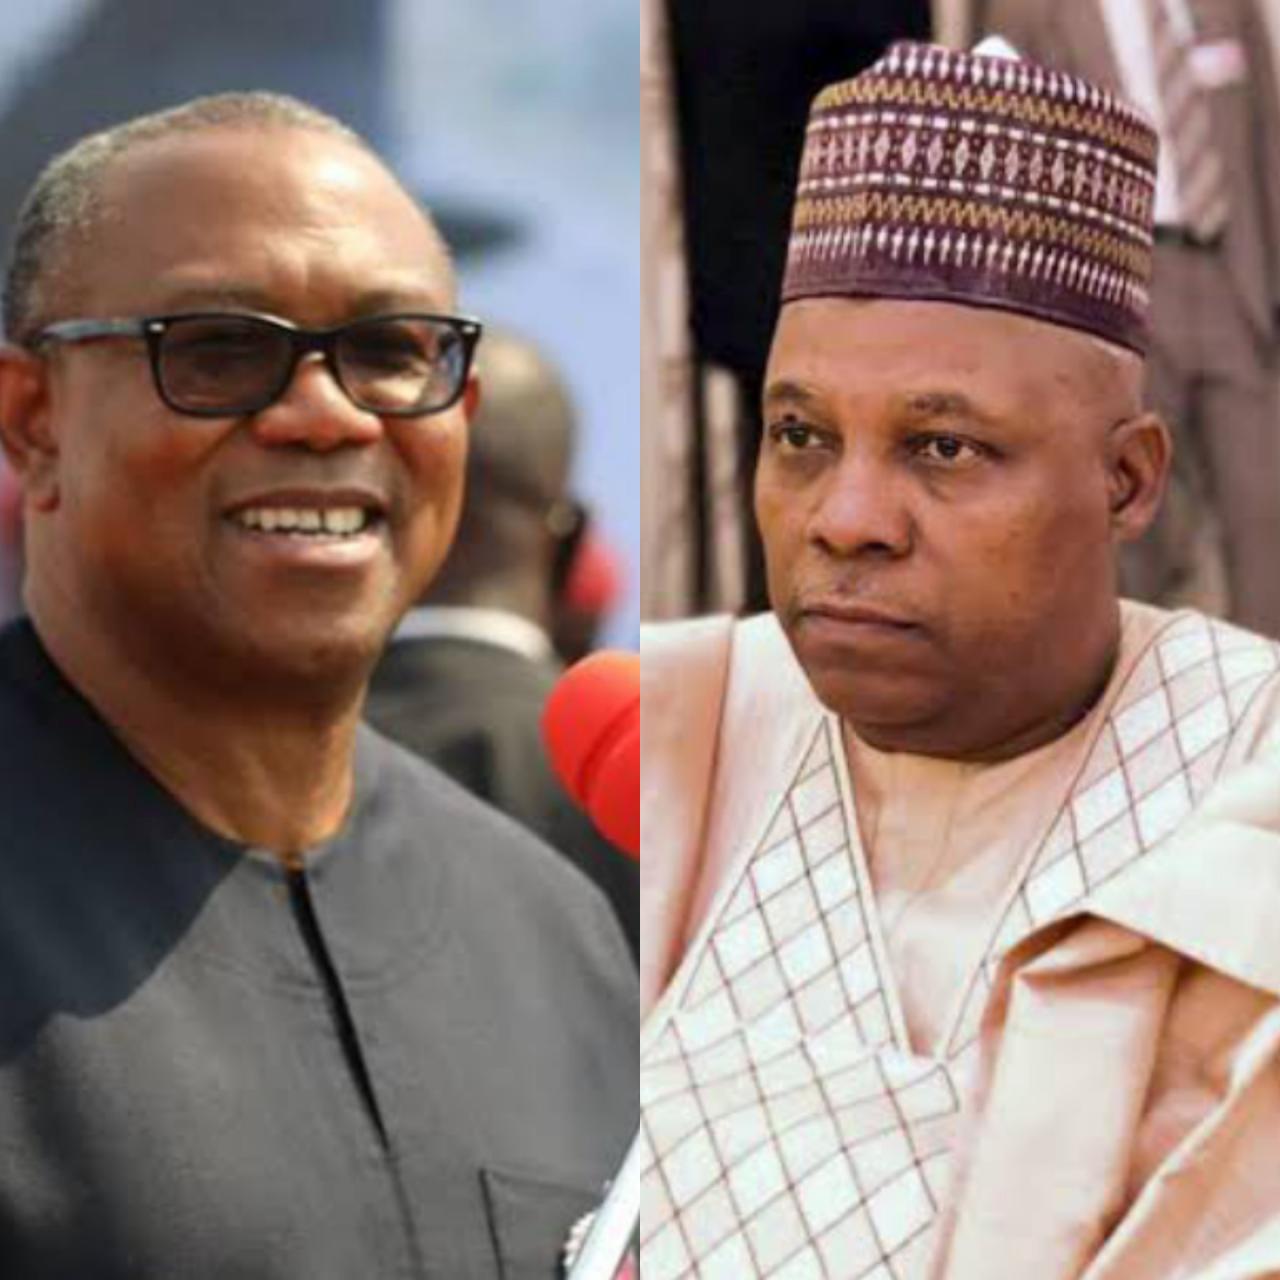 "Peter Obi can only become President in Igboland, not in Nigeria" - Shettima